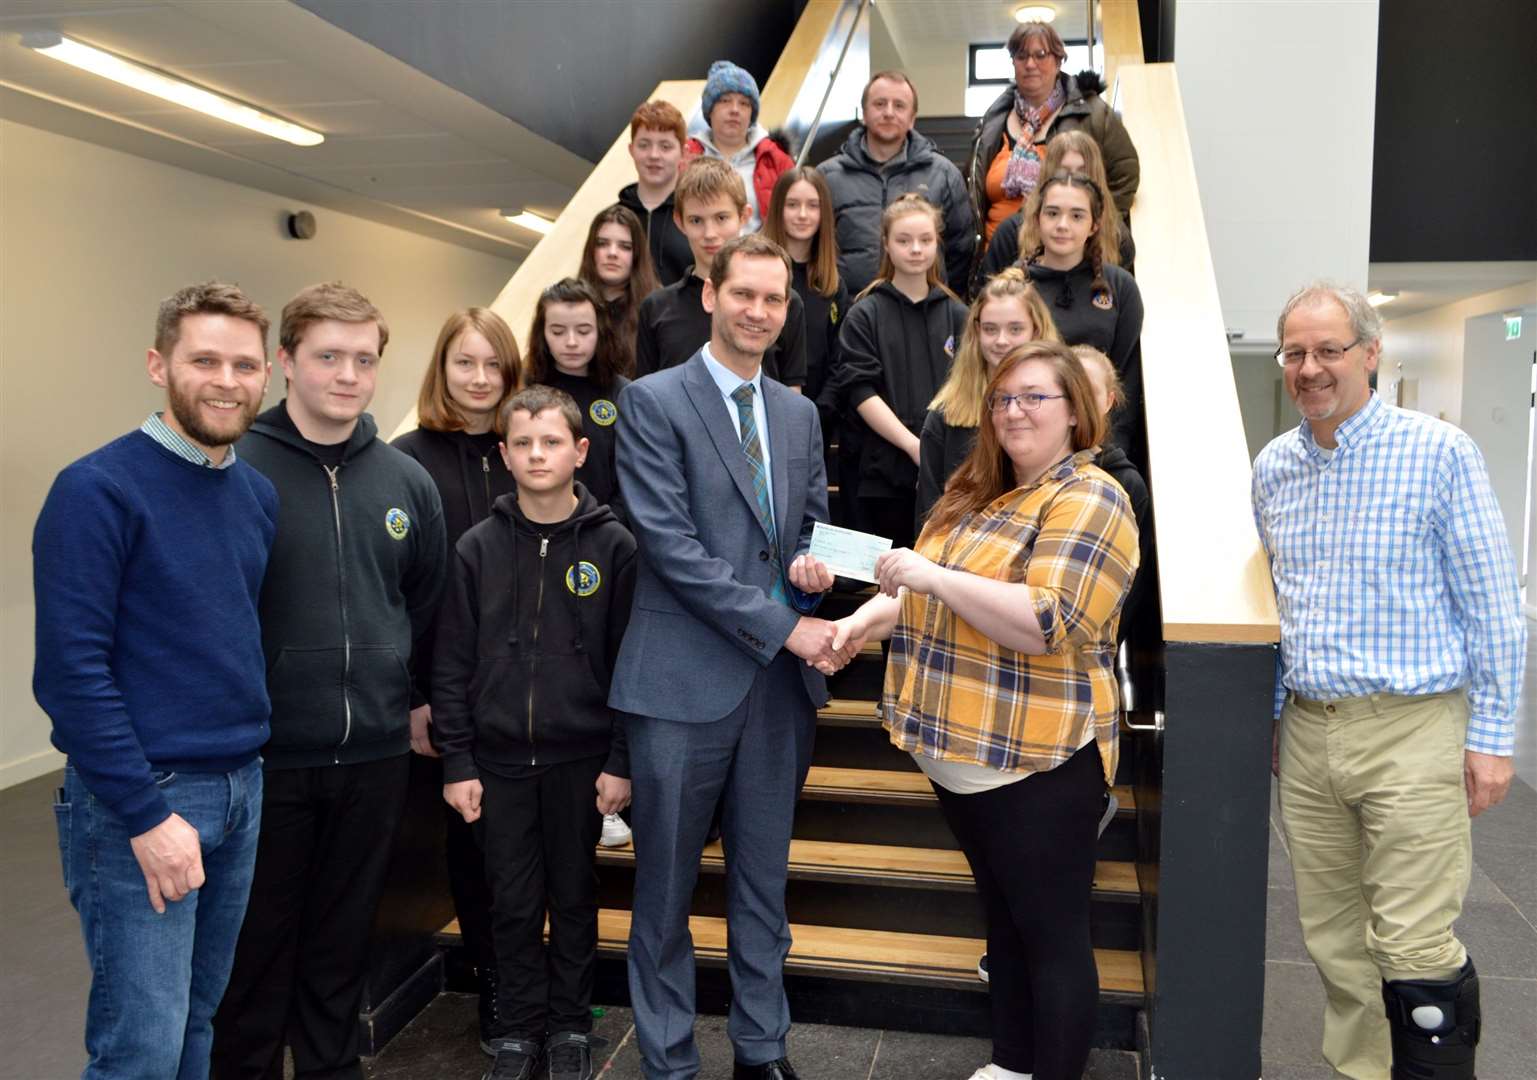 Mrs Sam Manson, secretary of the newly formed Wick High School Parent Council, handing over cheques totalling £750 to acting rector Sebastian Sandecki with pupils who attend the school's inventors' and textiles clubs looking on. Pictures: Julia M Dunnet